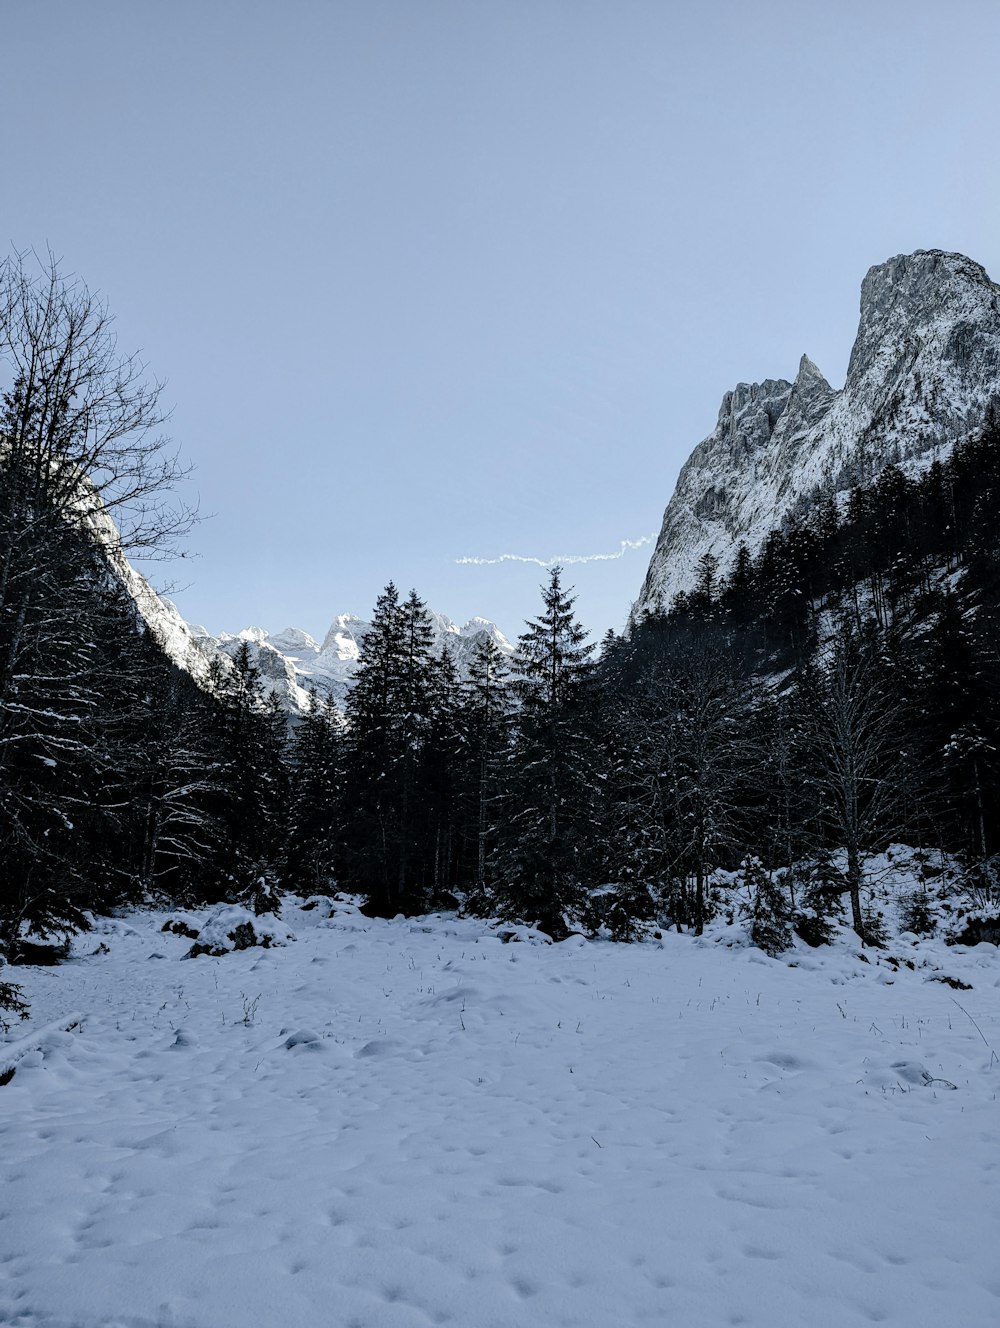 a snowy field with trees and mountains in the background